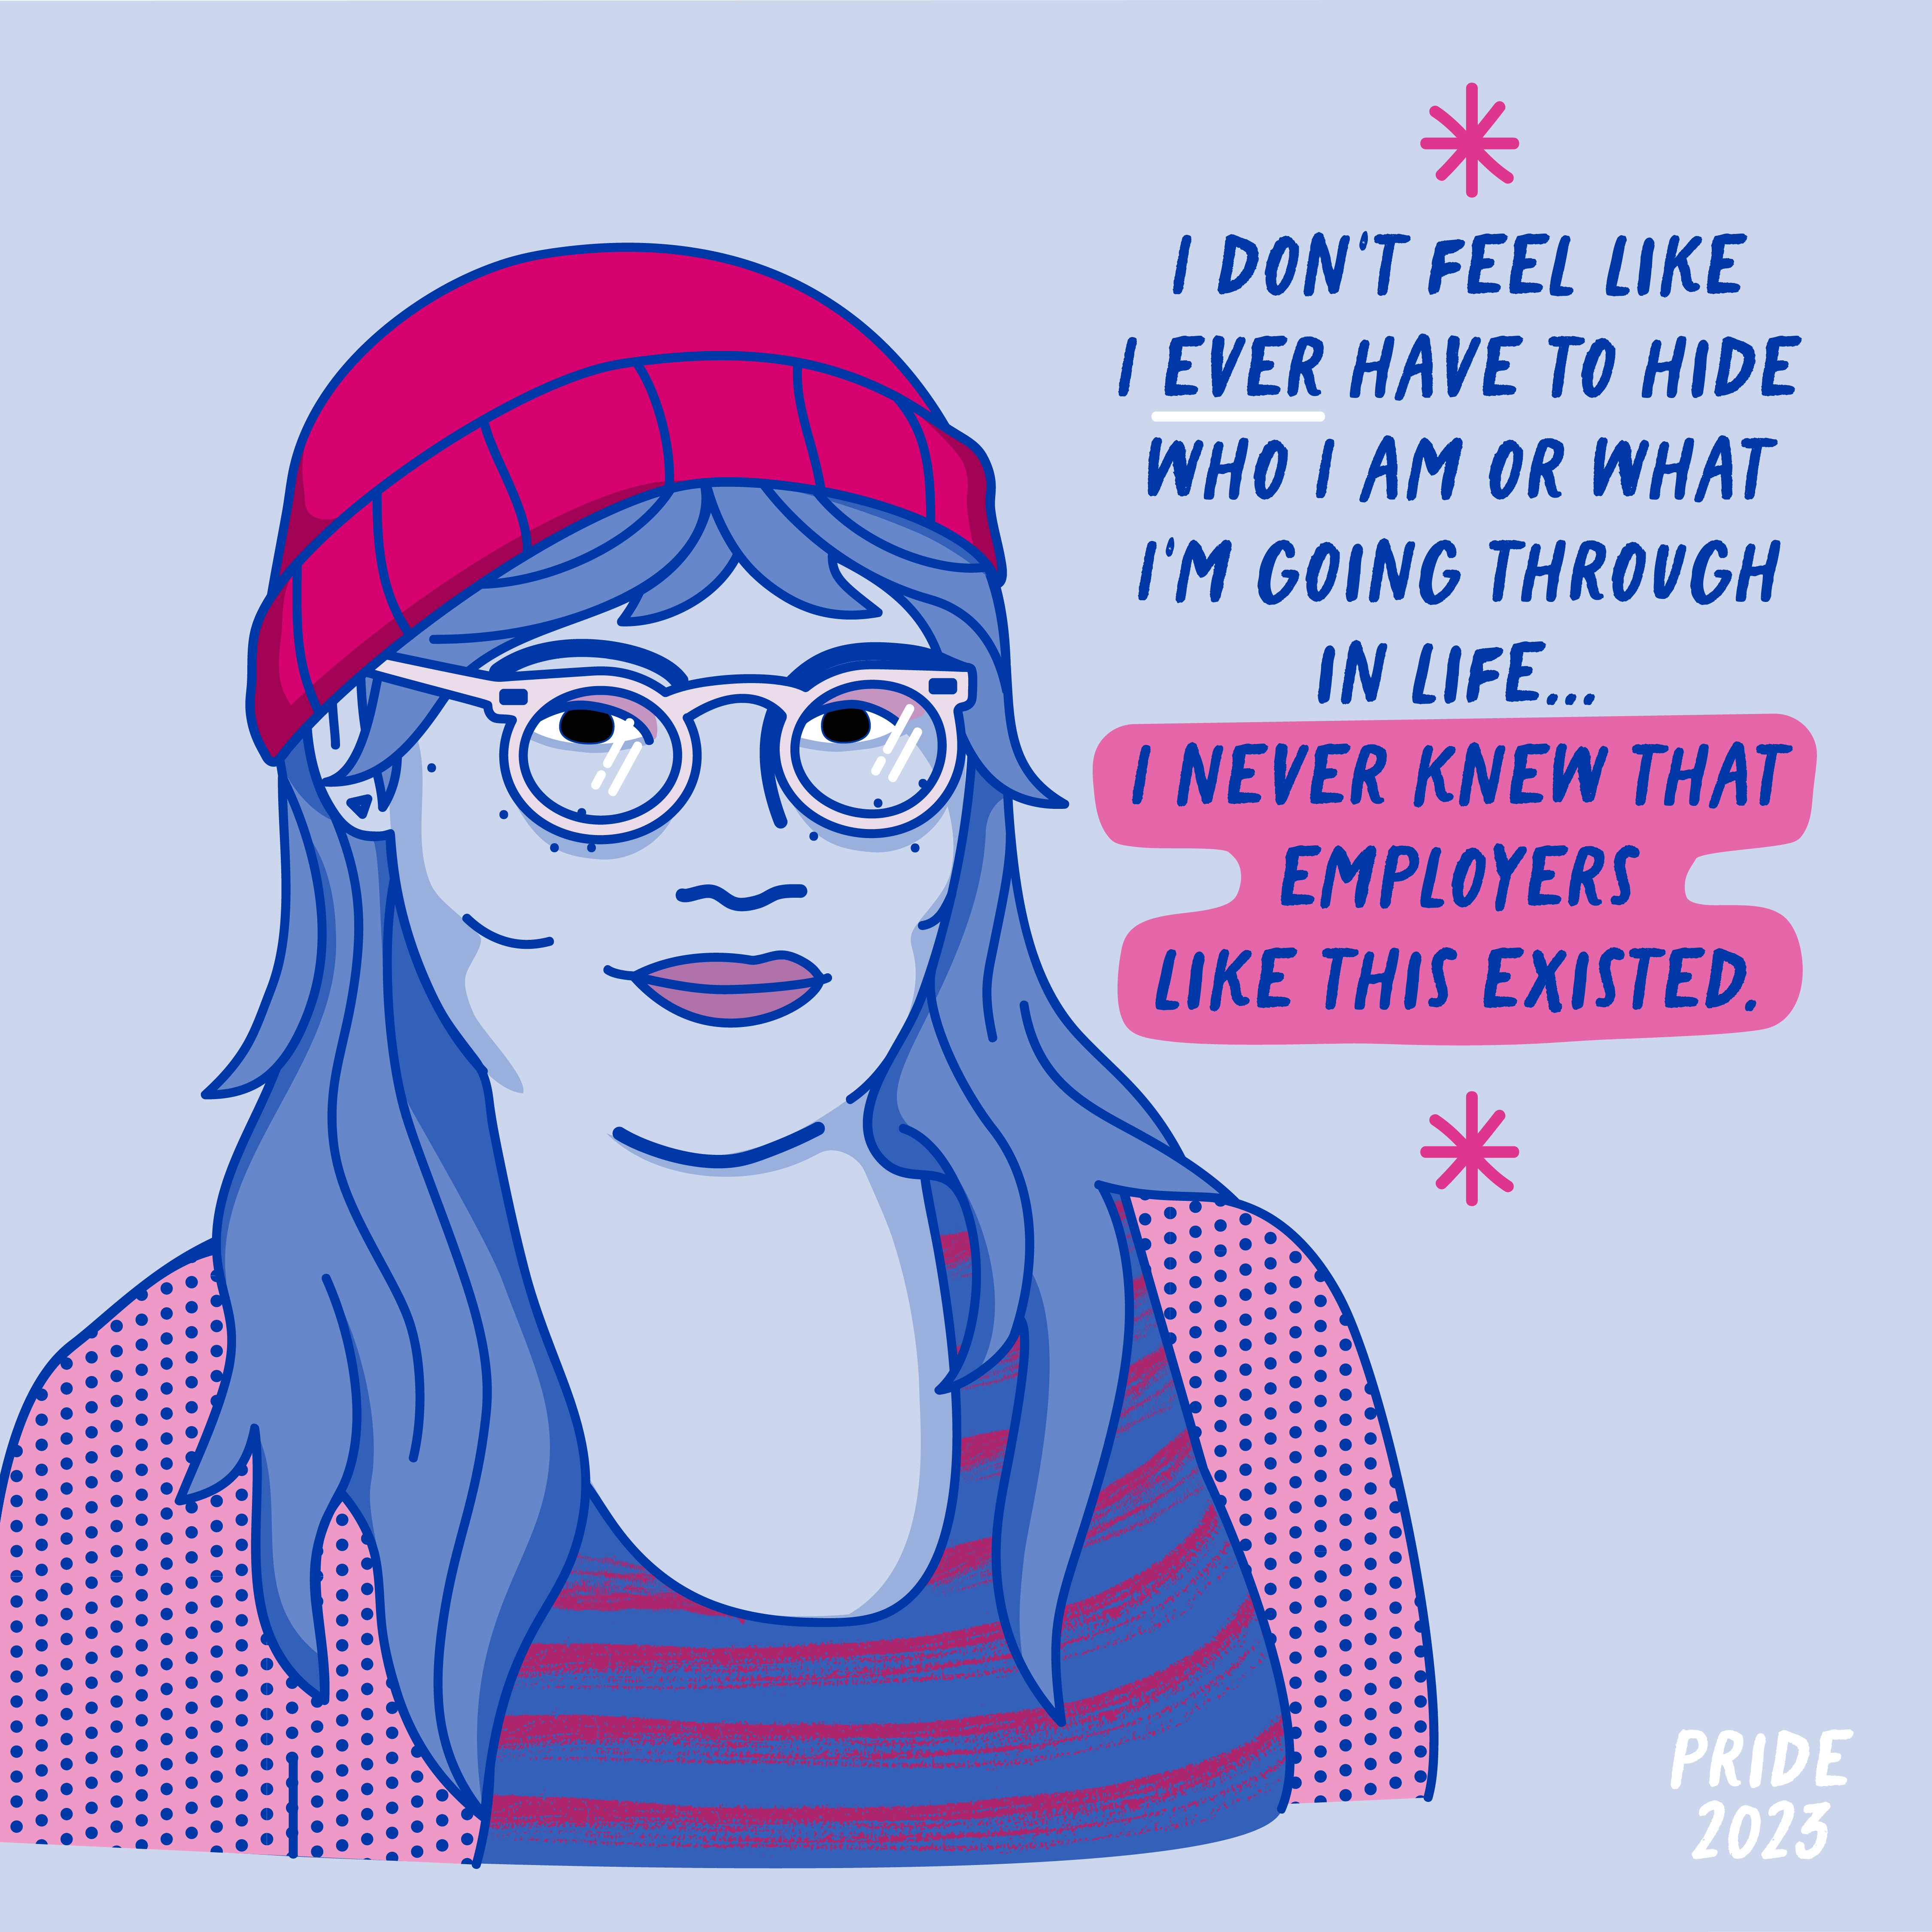 Illustration of a queer woman with a beanie and glasses is quoted saying she never knew employers like this existed, in handwritten text